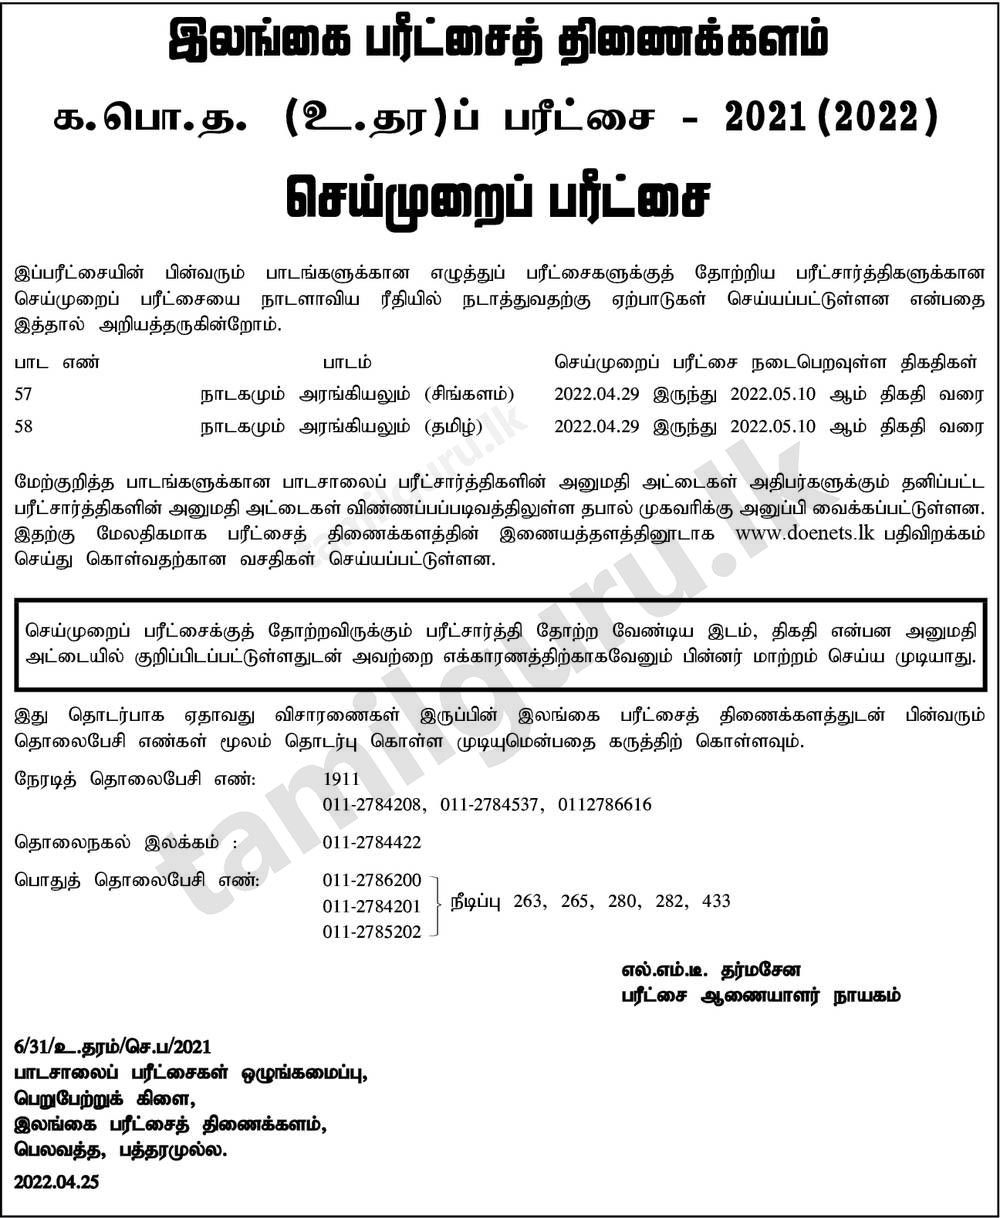 Admission Card for Practical Tests (Drama & Theatre) - G.C.E A/L Examination - 2021 (2022) (Details in Tamil)